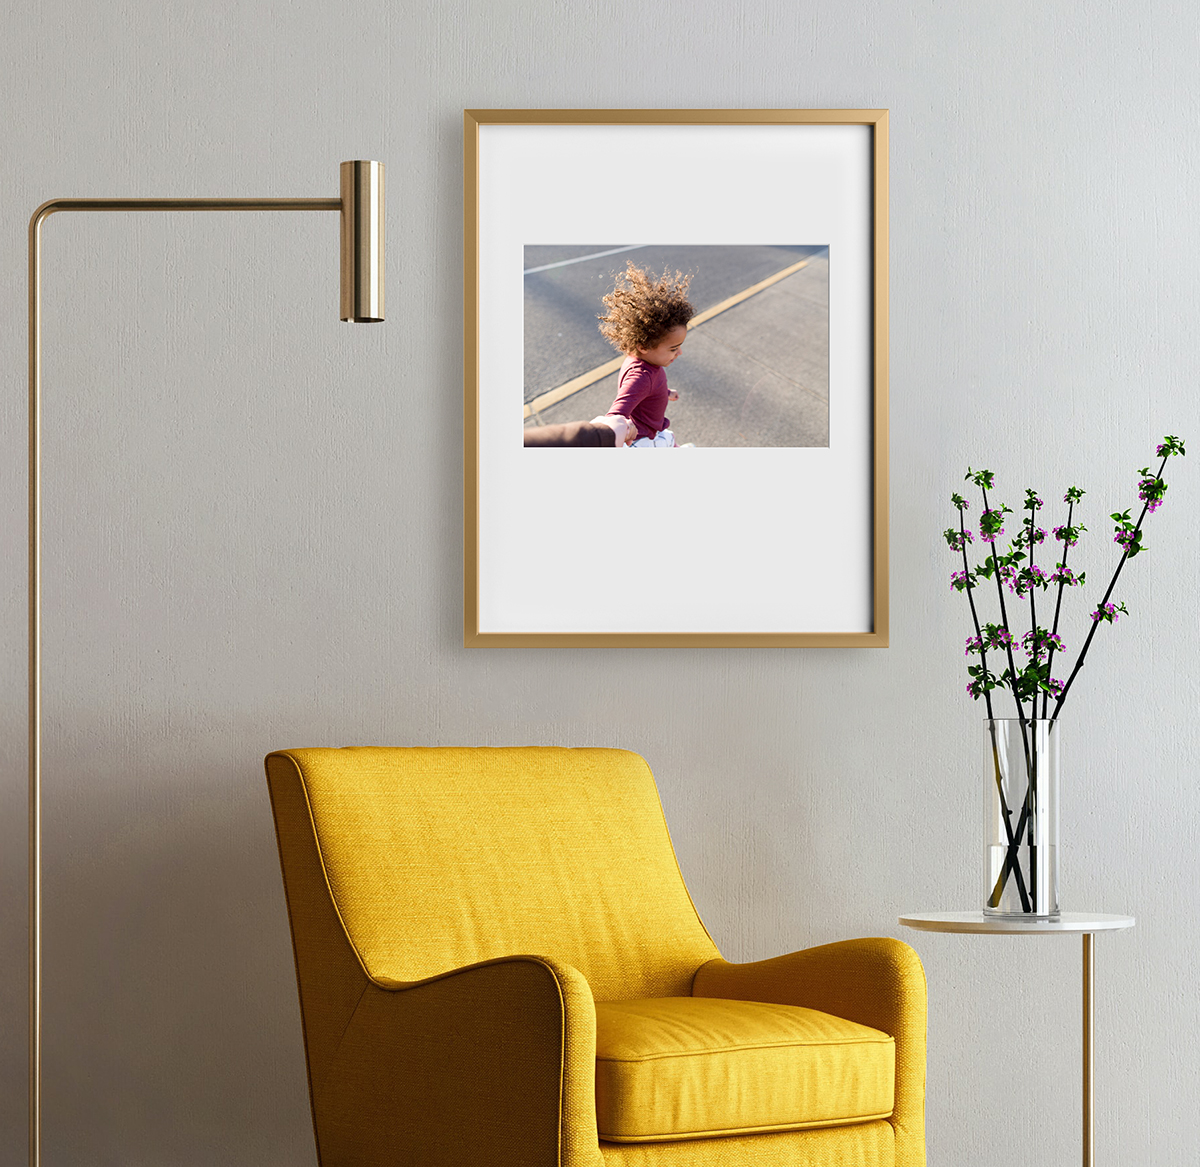 Artifact Uprising Modern Metal Frame featuring prominent mat and photo of little girl hung above honeycomb armchair